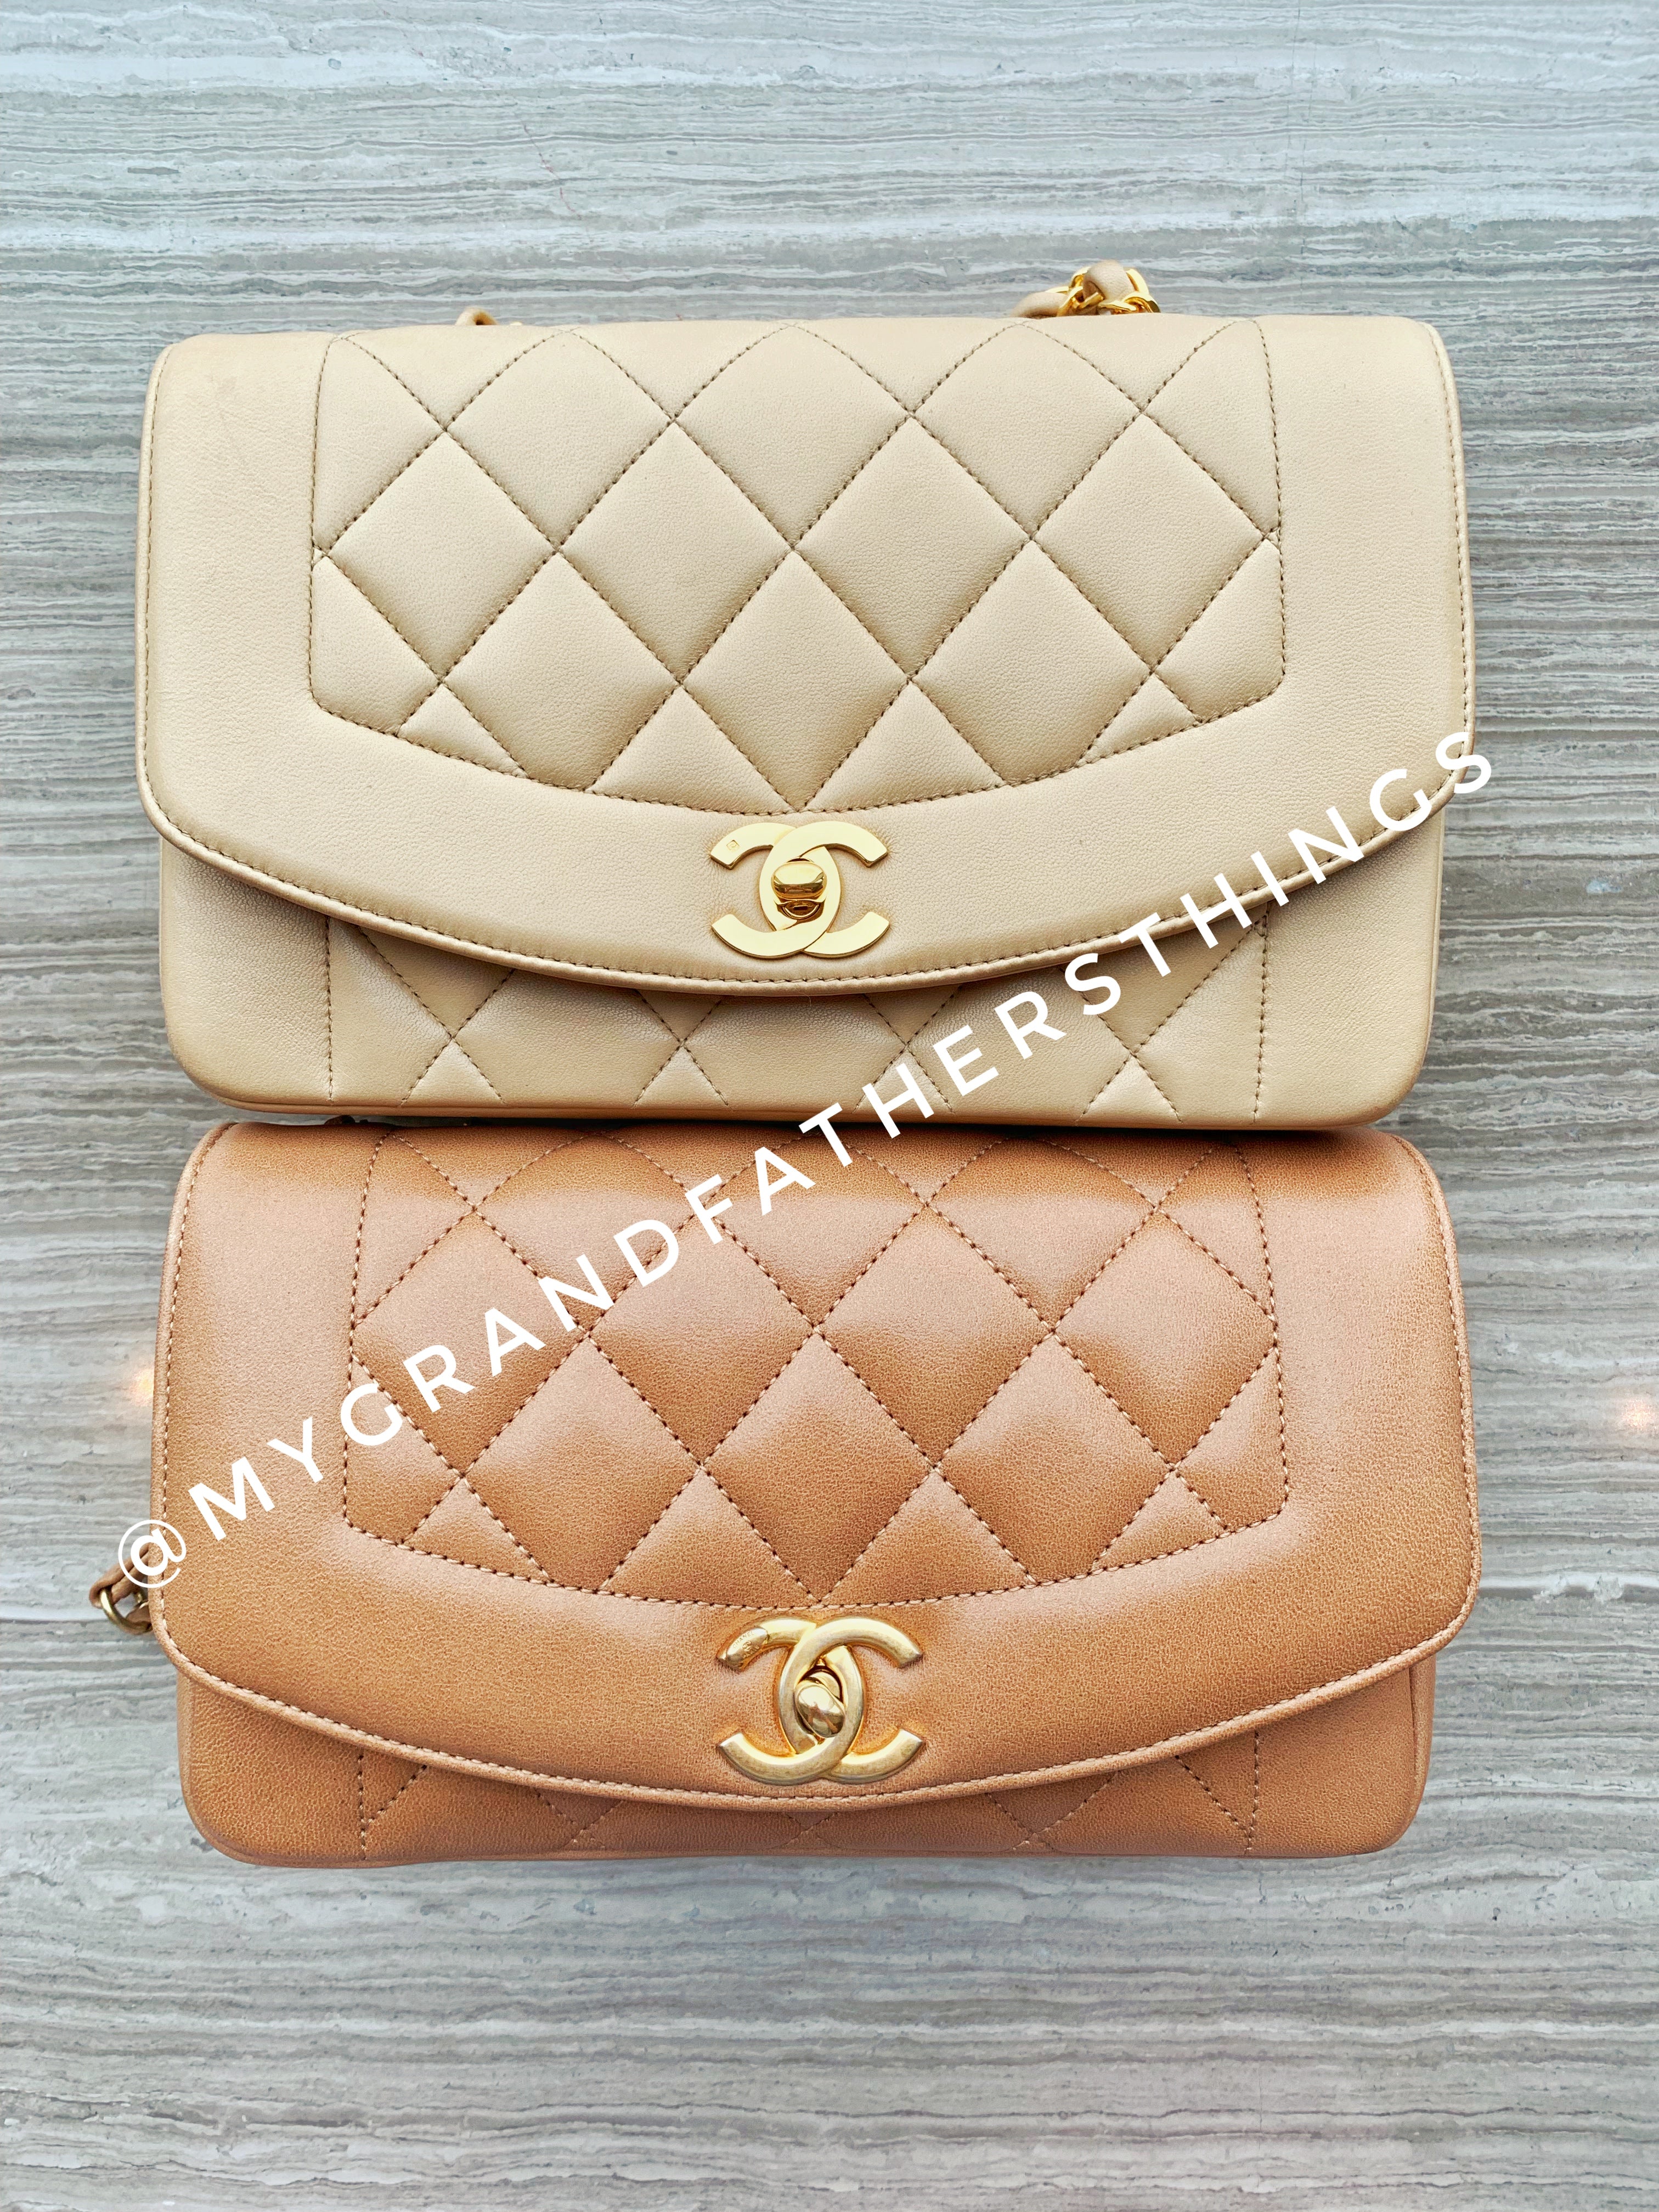 🖤 [SOLD] VINTAGE CHANEL LADY DIANA CLASSIC QUILTED MEDIUM FLAP